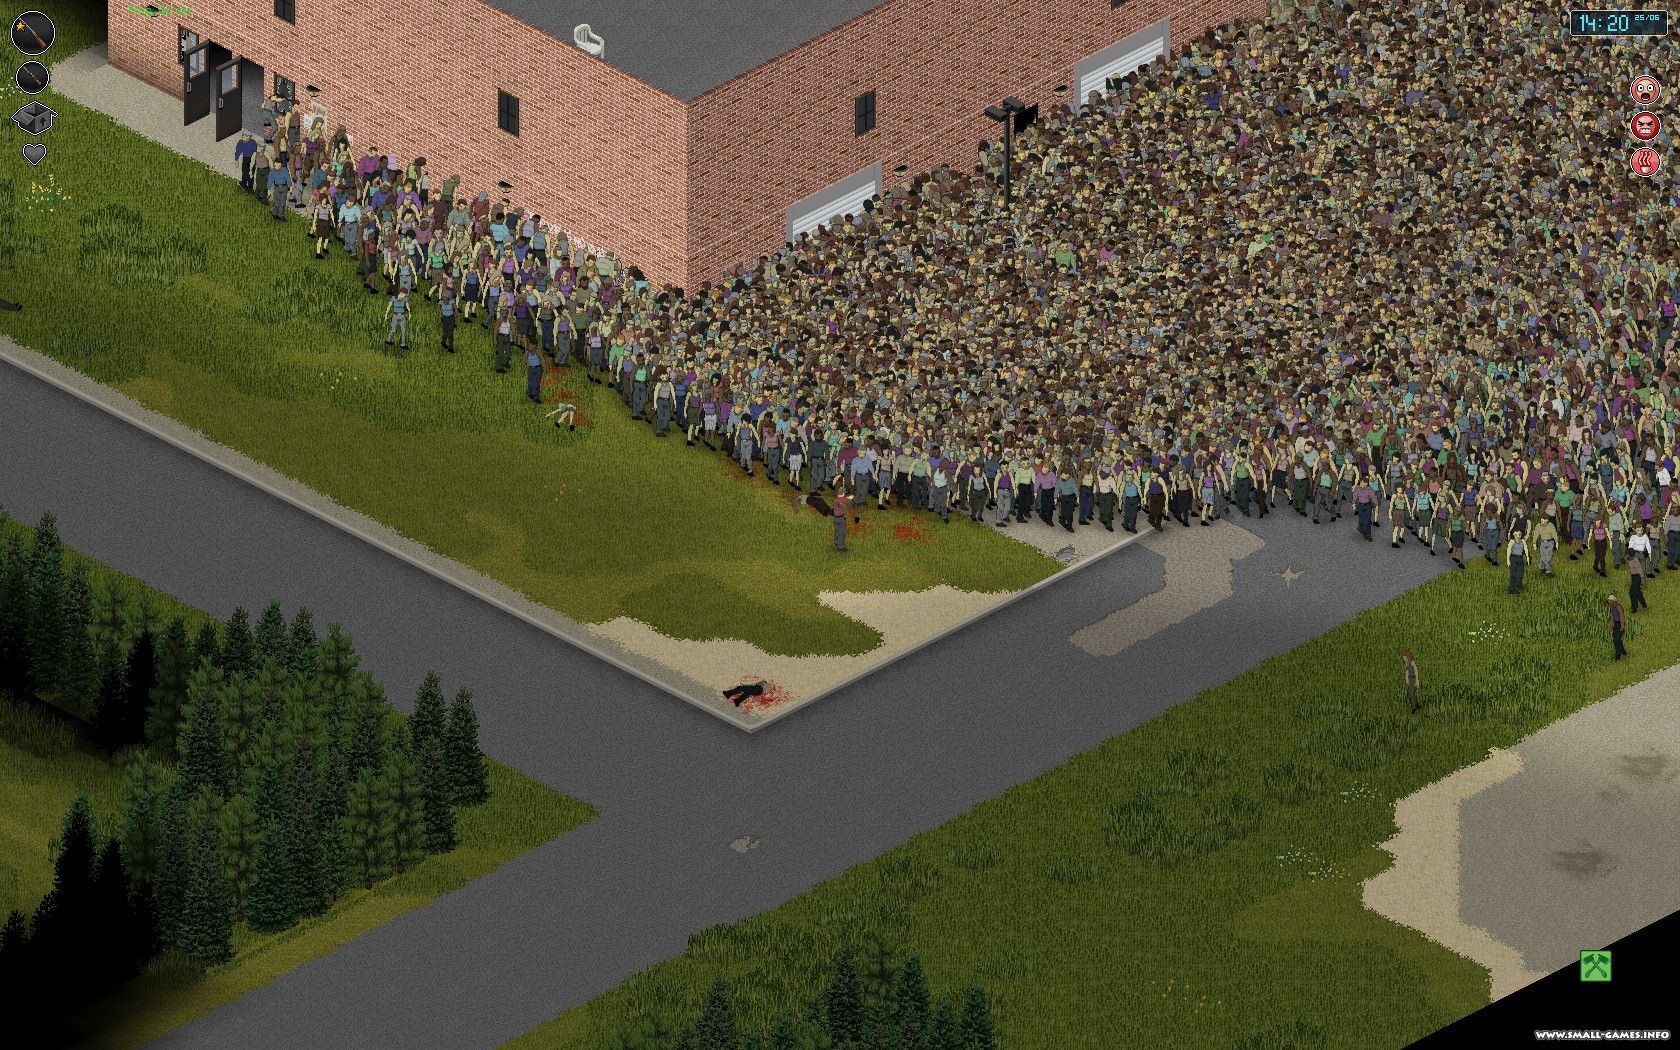 project zomboid build 41 download